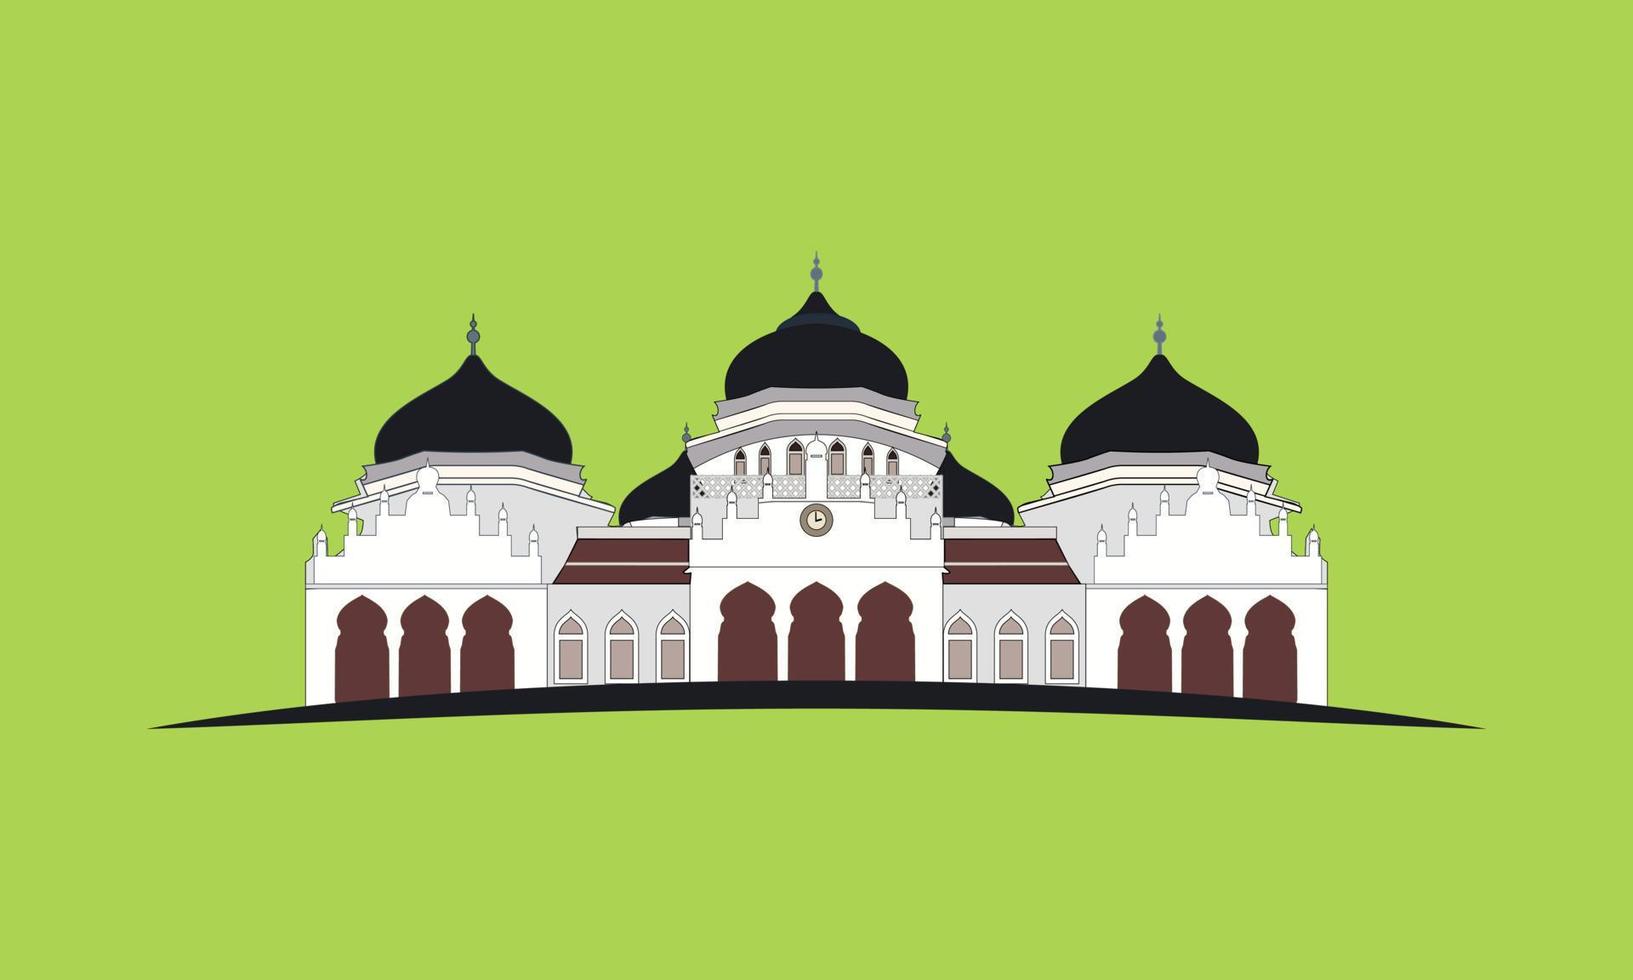 Grand Mosque Vector Illustration on  Solid Color Background